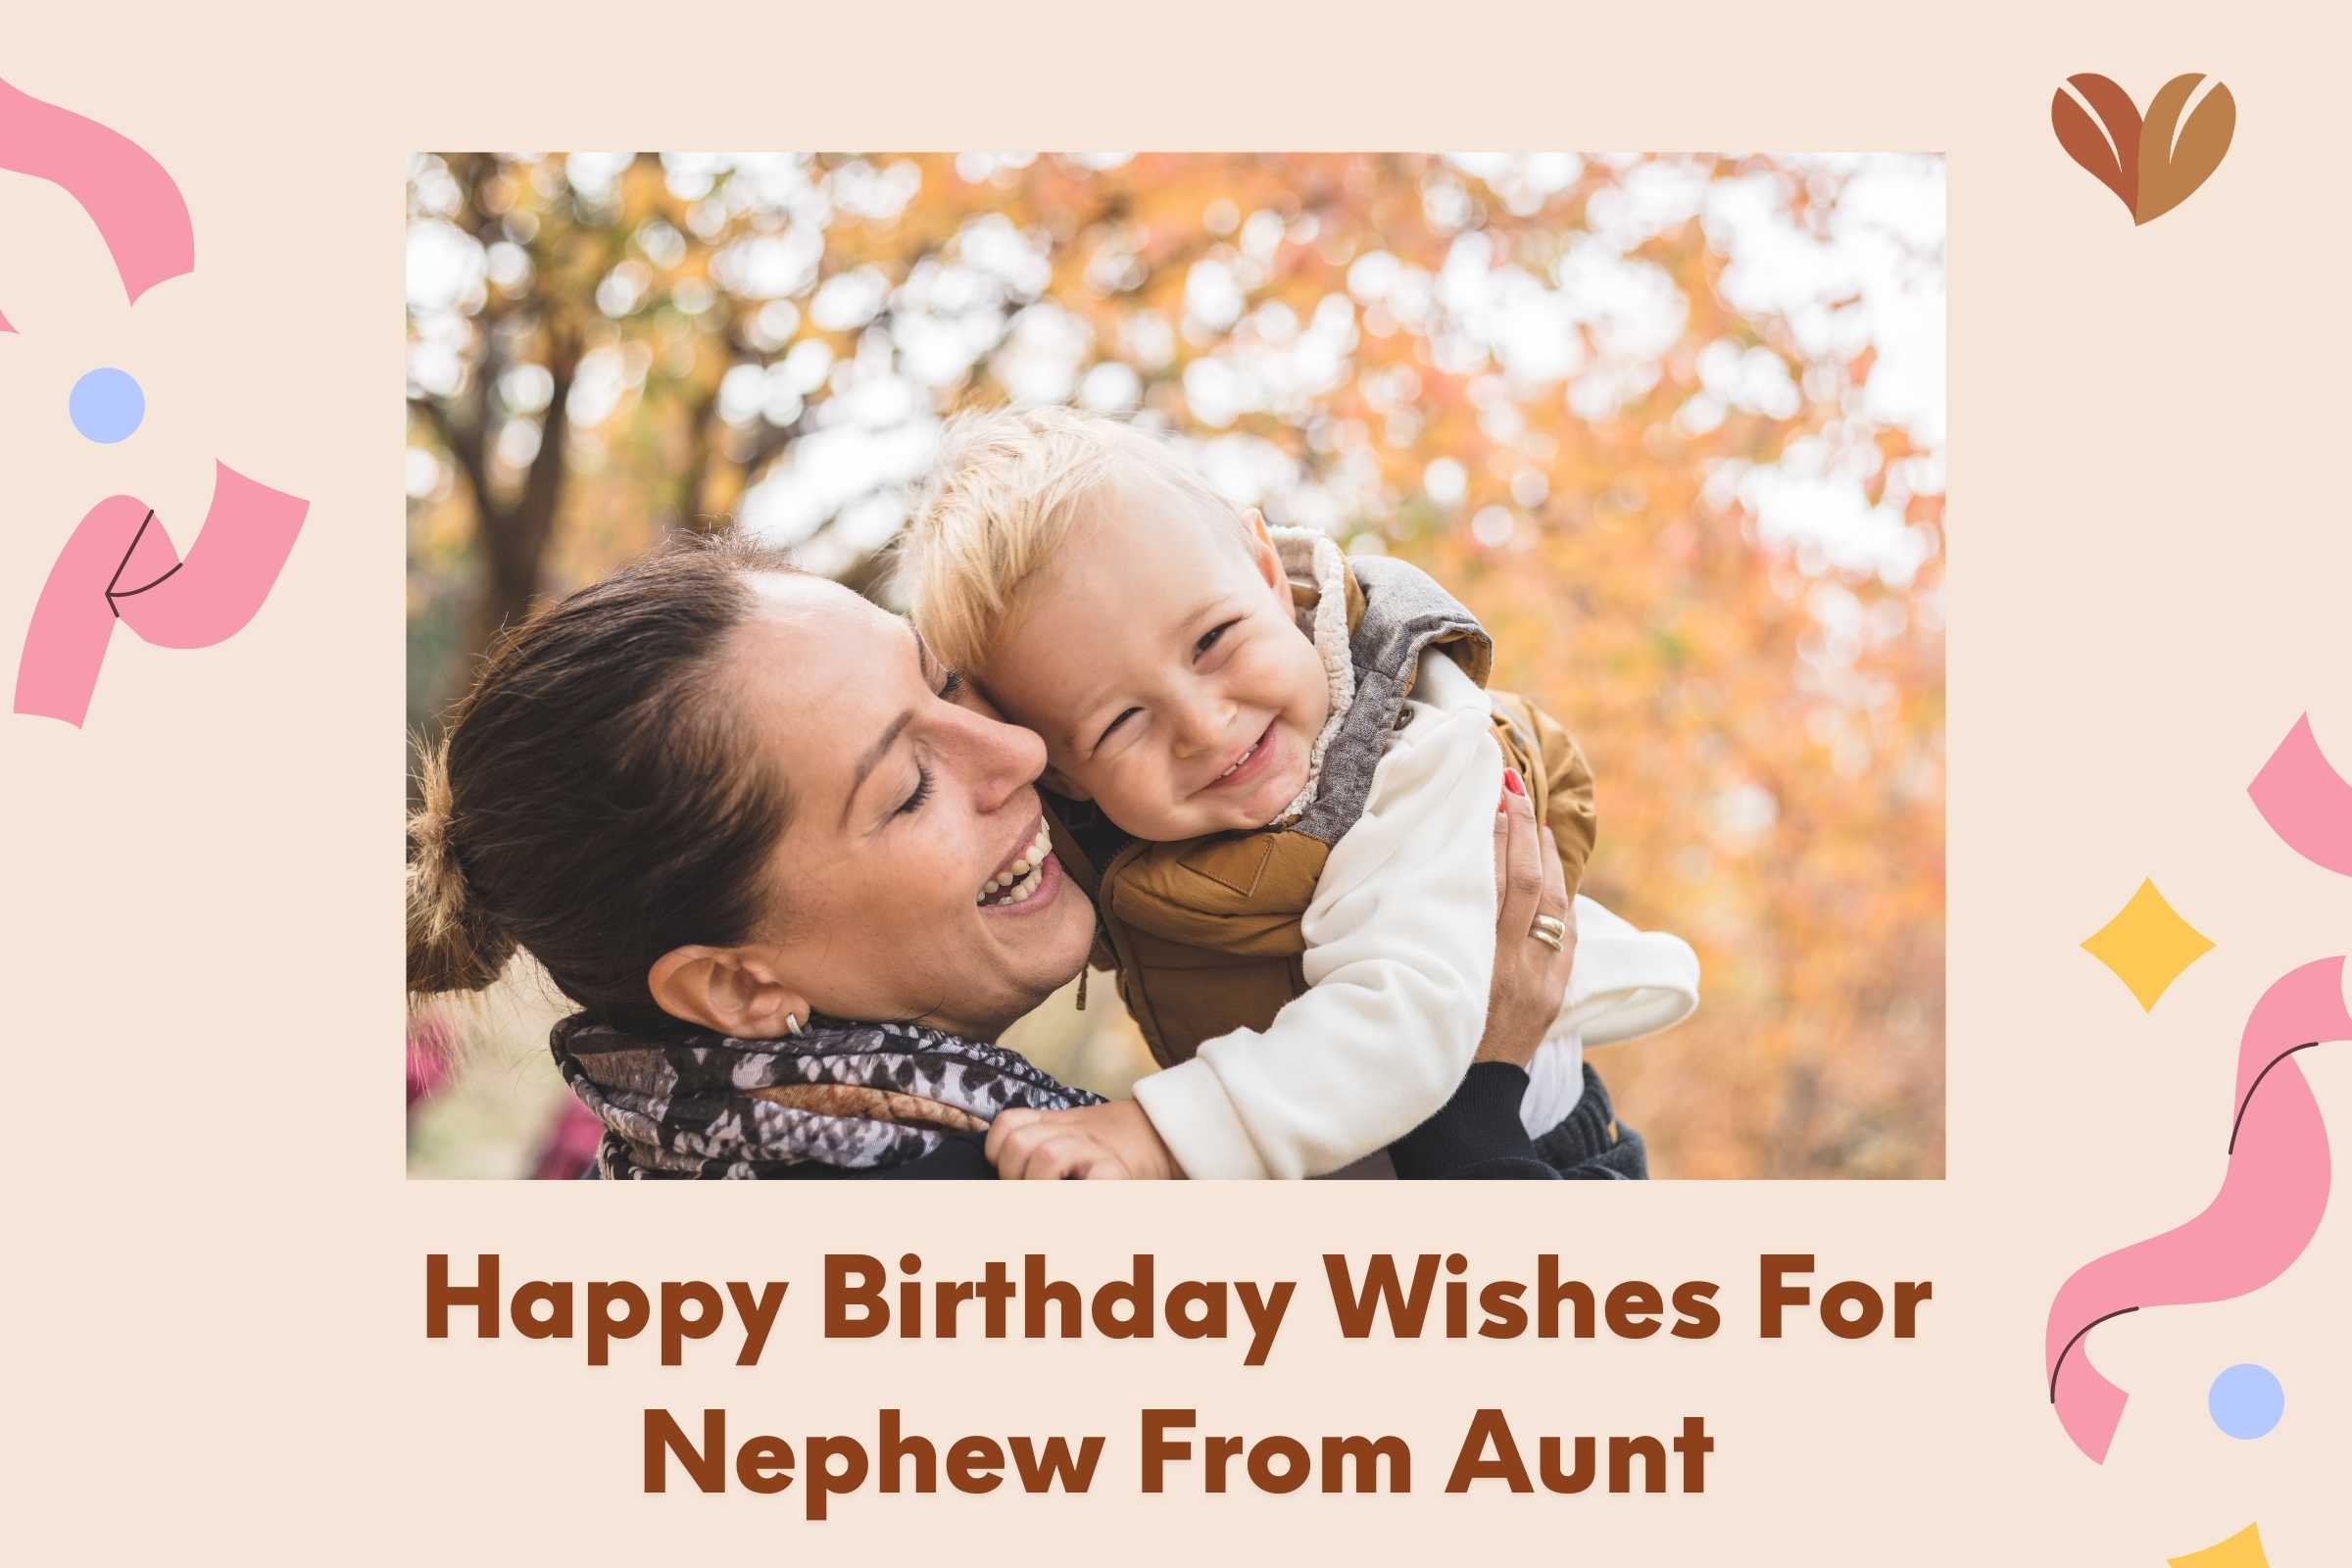 Vibrant birthday cards display ultimate wishes for a nephew from his loving aunt.